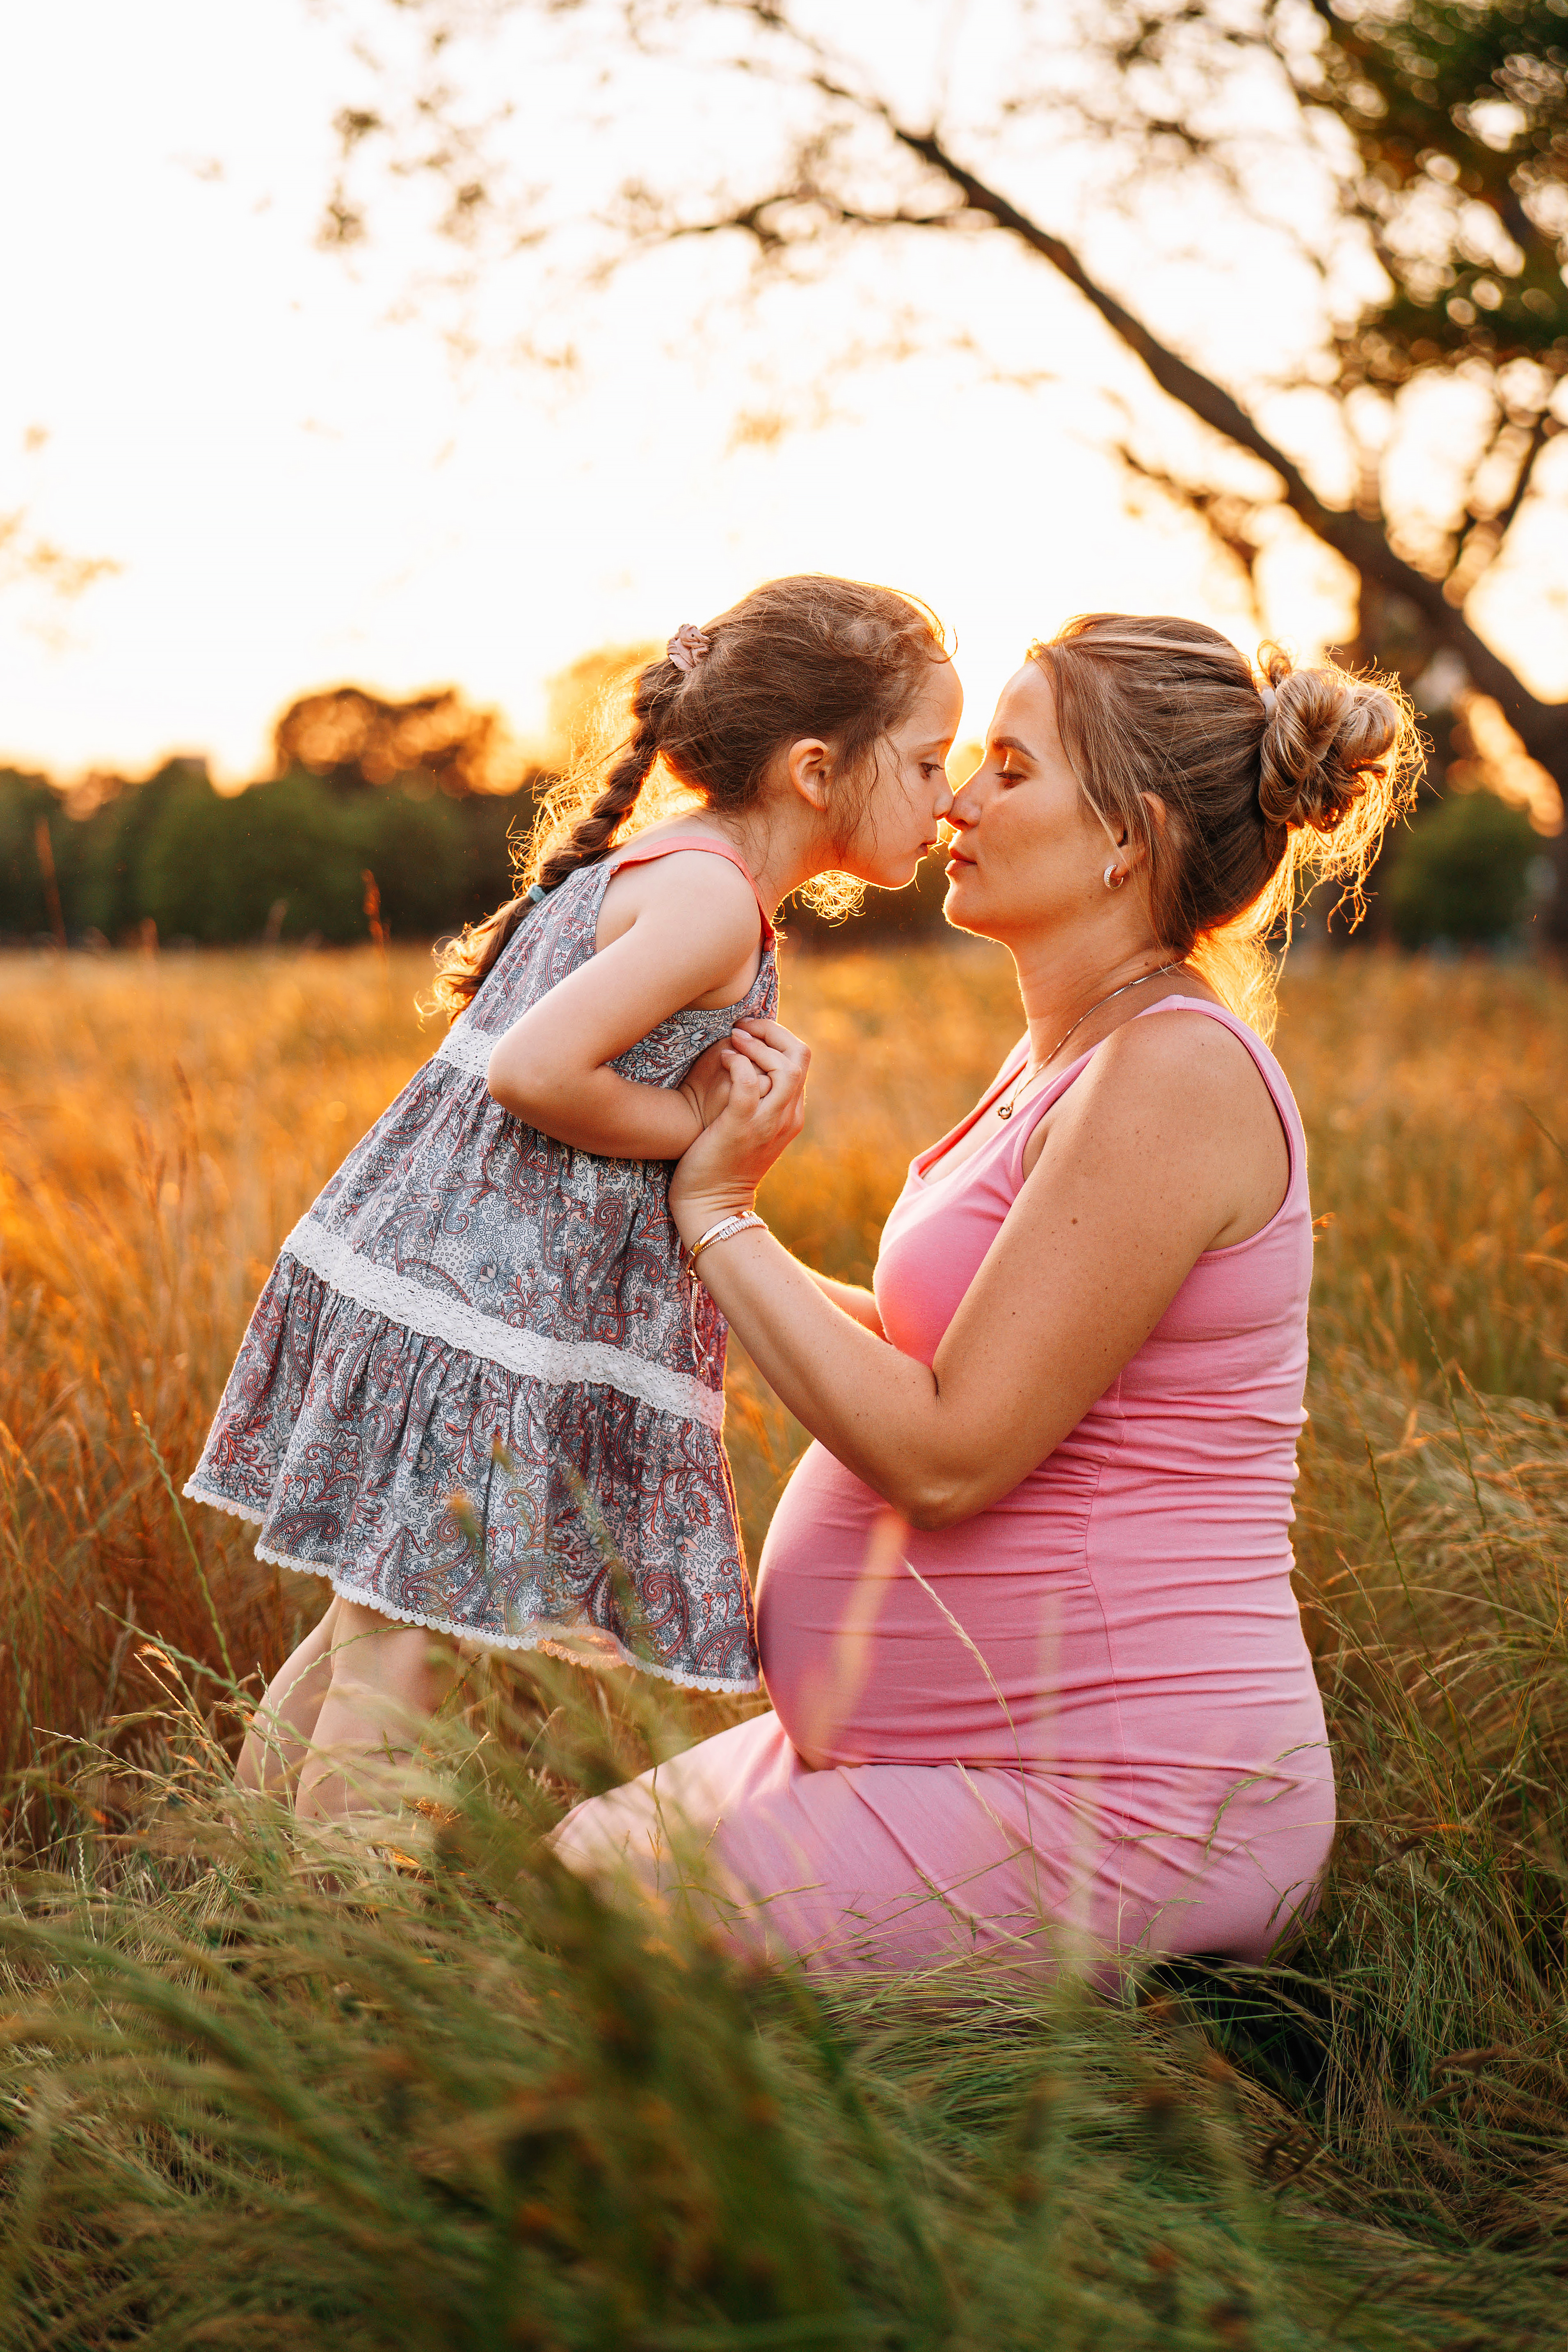 Family portrait of a girl and her mother in the park during sunset